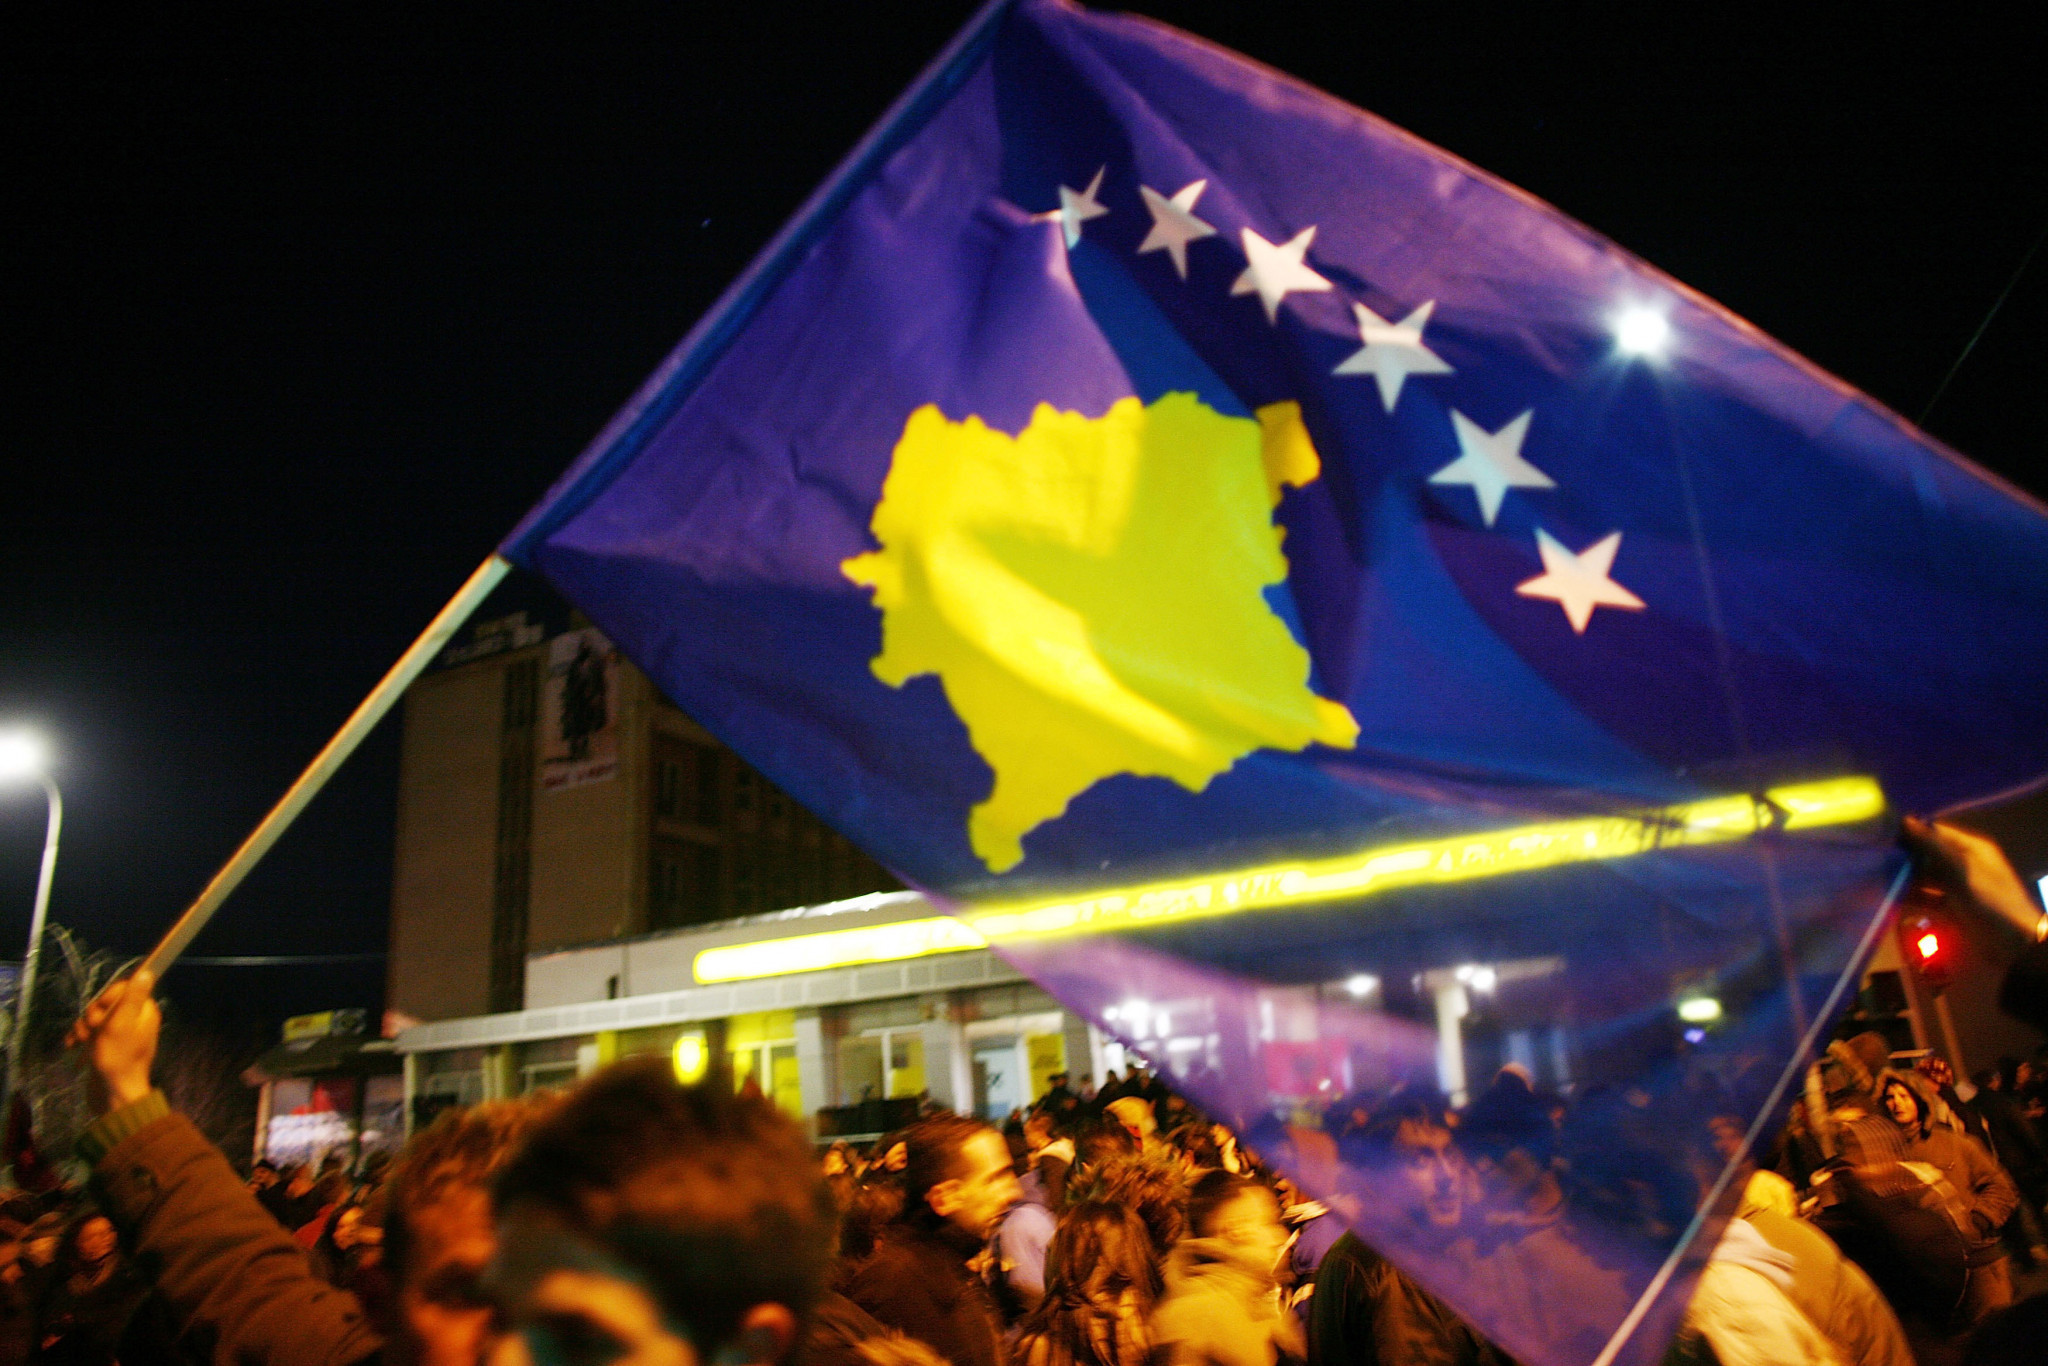 Exclusive: Kosovo hopes to join International Paralympic Committee by end of 2022